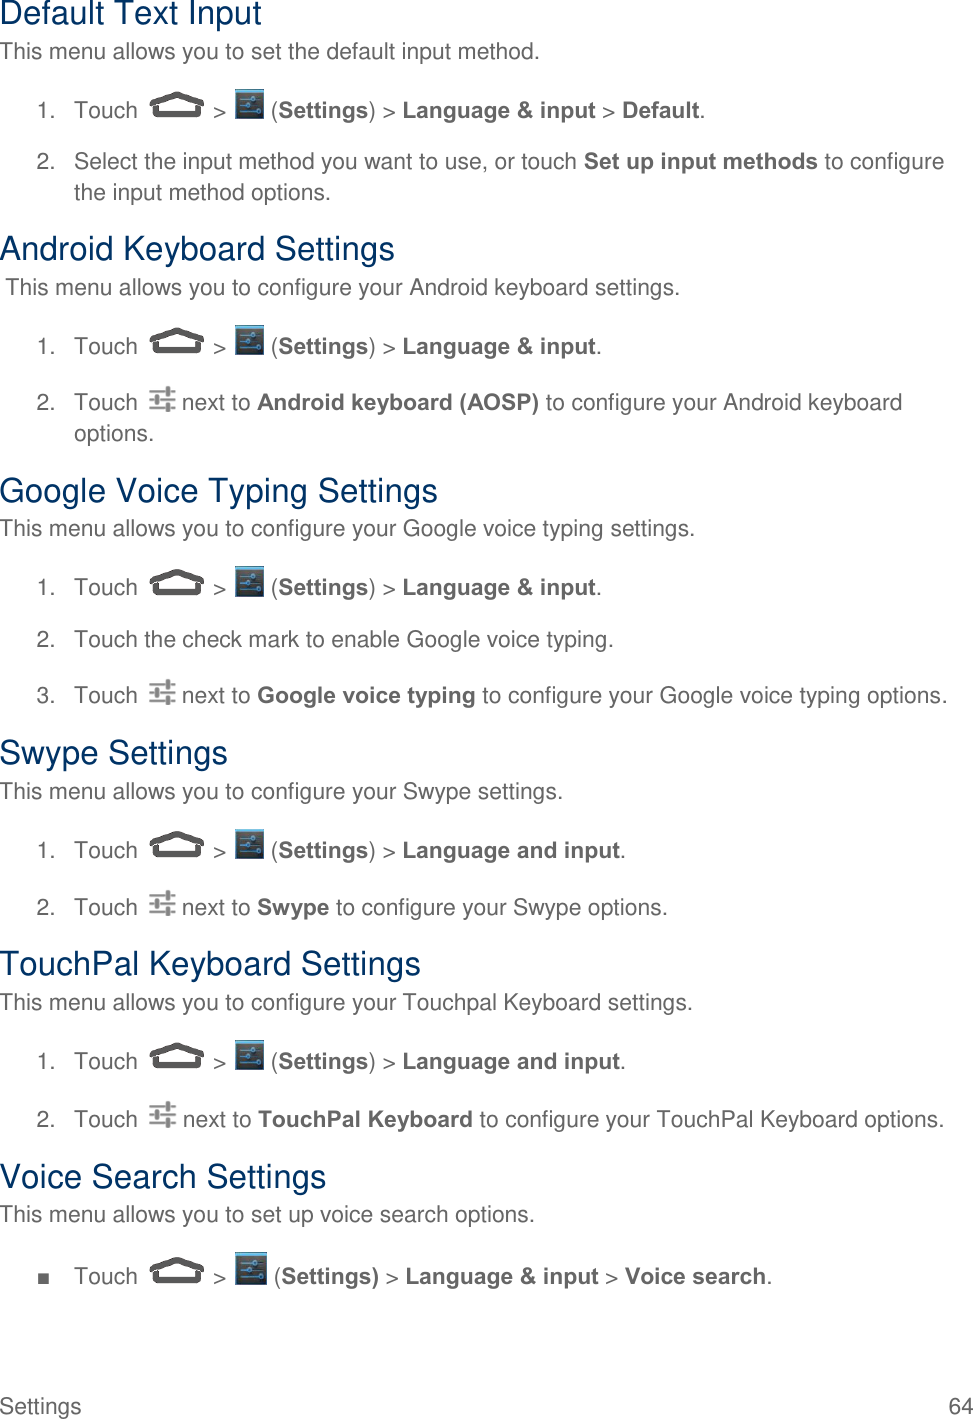  Settings  64 Default Text Input This menu allows you to set the default input method. 1.  Touch   &gt;   (Settings) &gt; Language &amp; input &gt; Default. 2.  Select the input method you want to use, or touch Set up input methods to configure the input method options. Android Keyboard Settings  This menu allows you to configure your Android keyboard settings. 1.  Touch   &gt;   (Settings) &gt; Language &amp; input. 2.  Touch   next to Android keyboard (AOSP) to configure your Android keyboard options. Google Voice Typing Settings This menu allows you to configure your Google voice typing settings. 1.  Touch   &gt;   (Settings) &gt; Language &amp; input. 2.  Touch the check mark to enable Google voice typing. 3.  Touch   next to Google voice typing to configure your Google voice typing options. Swype Settings This menu allows you to configure your Swype settings. 1.  Touch   &gt;   (Settings) &gt; Language and input. 2.  Touch   next to Swype to configure your Swype options. TouchPal Keyboard Settings This menu allows you to configure your Touchpal Keyboard settings. 1.  Touch   &gt;   (Settings) &gt; Language and input. 2.  Touch  next to TouchPal Keyboard to configure your TouchPal Keyboard options. Voice Search Settings This menu allows you to set up voice search options. ■  Touch   &gt;   (Settings) &gt; Language &amp; input &gt; Voice search. 